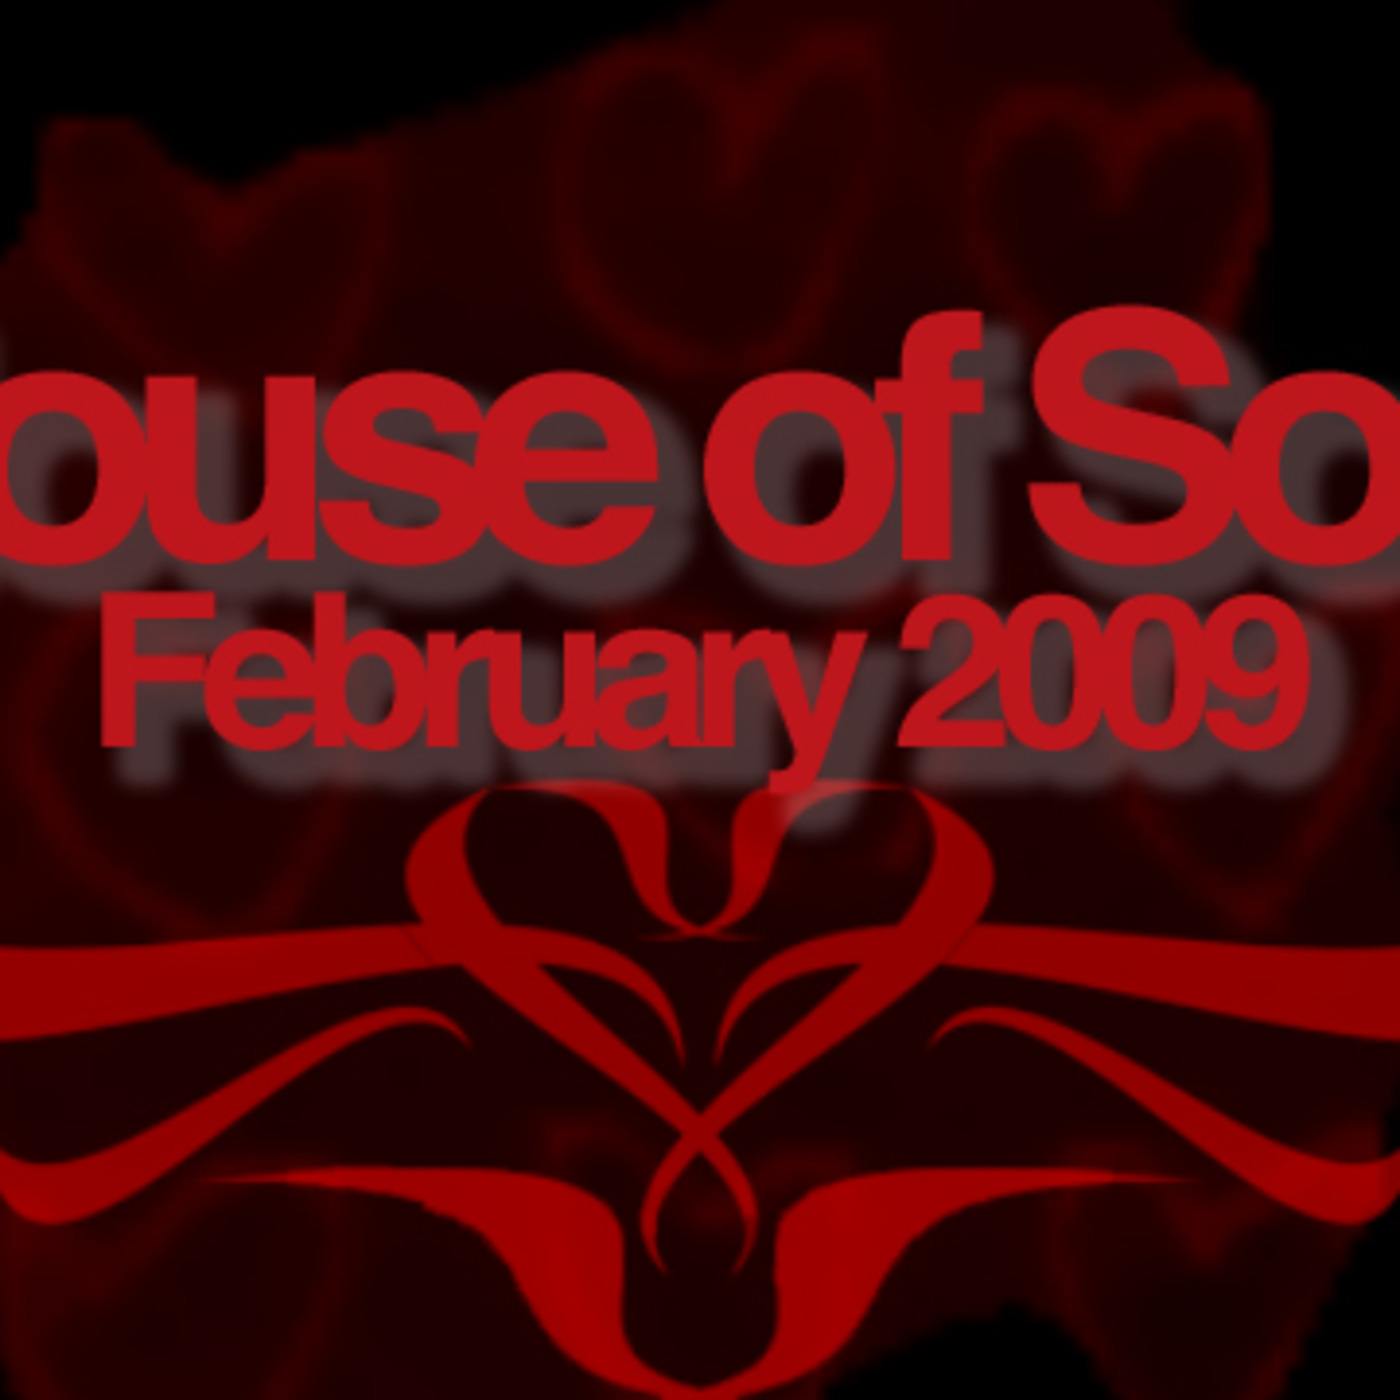 Episode 84: House of Soul February 2009